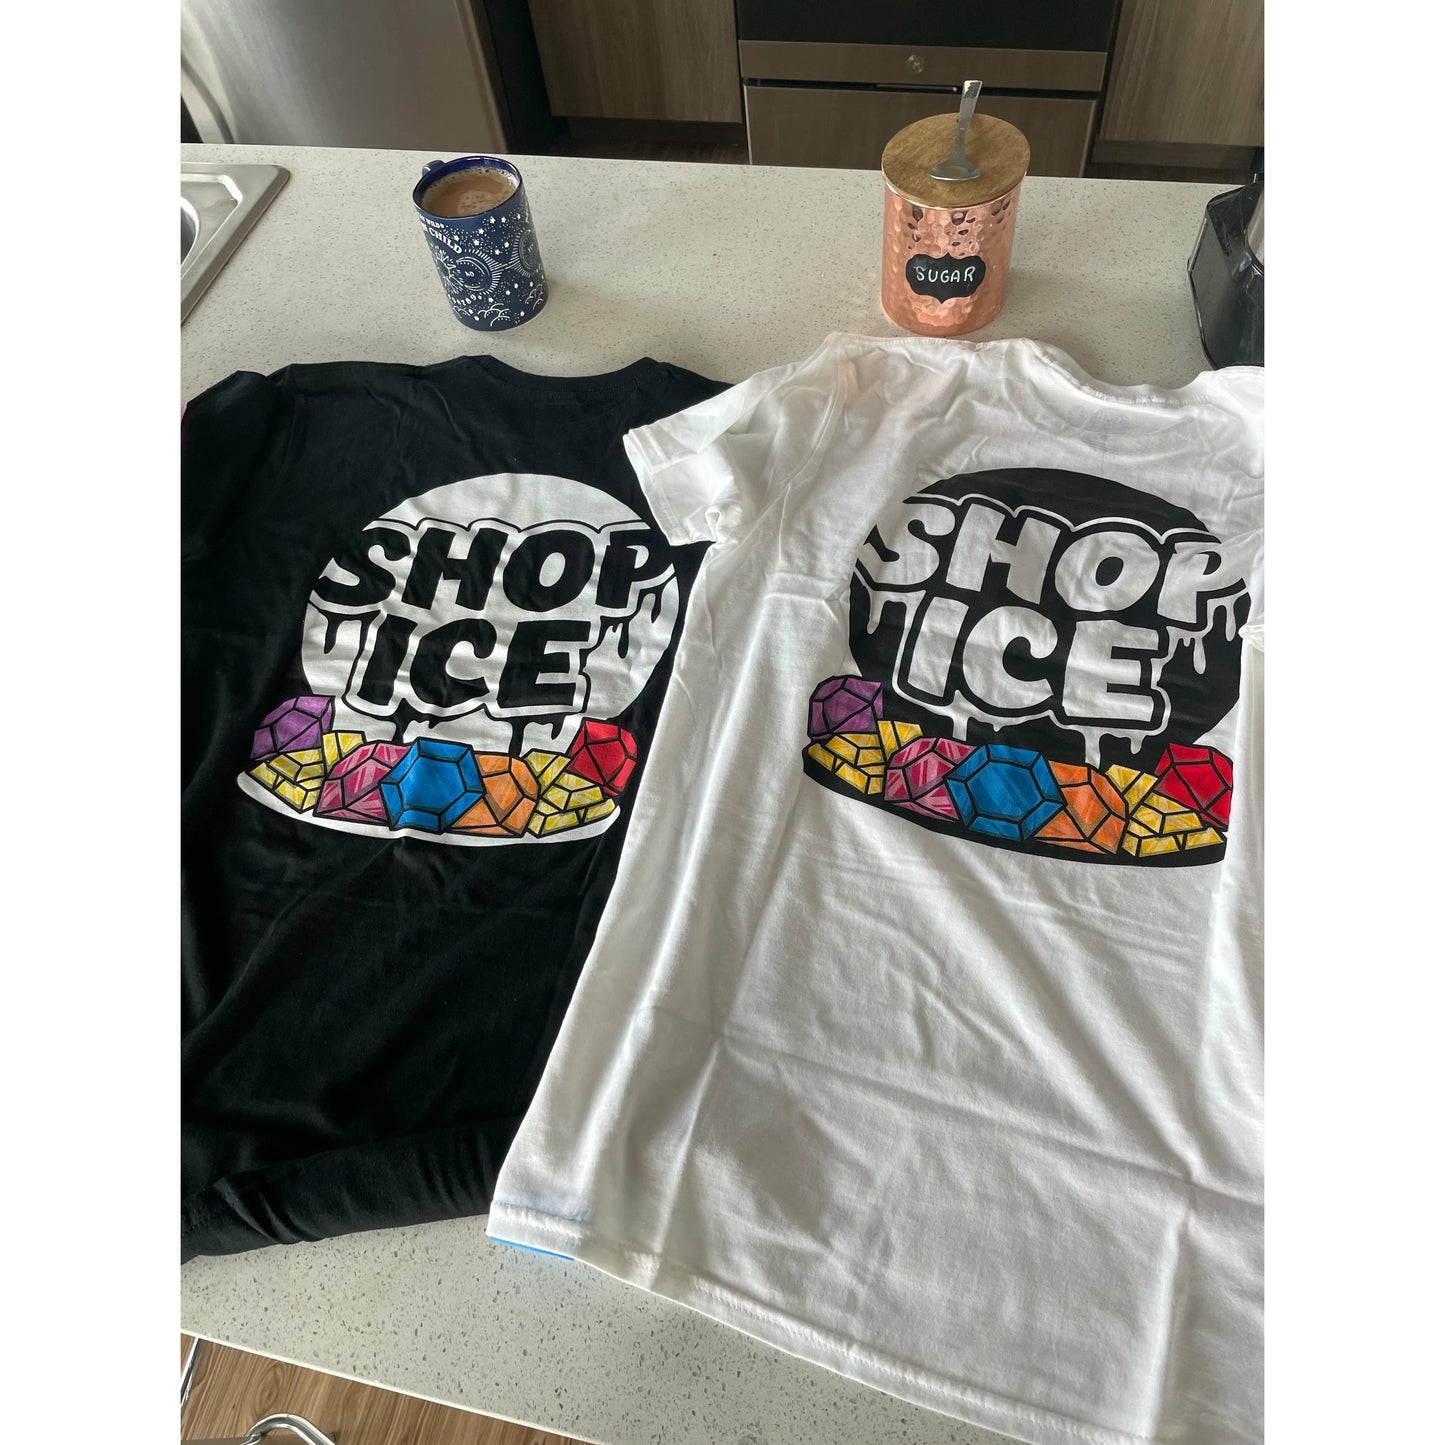 FREE OFFICIAL SHOP ICE T-SHIRT - TheShopIceStore.com